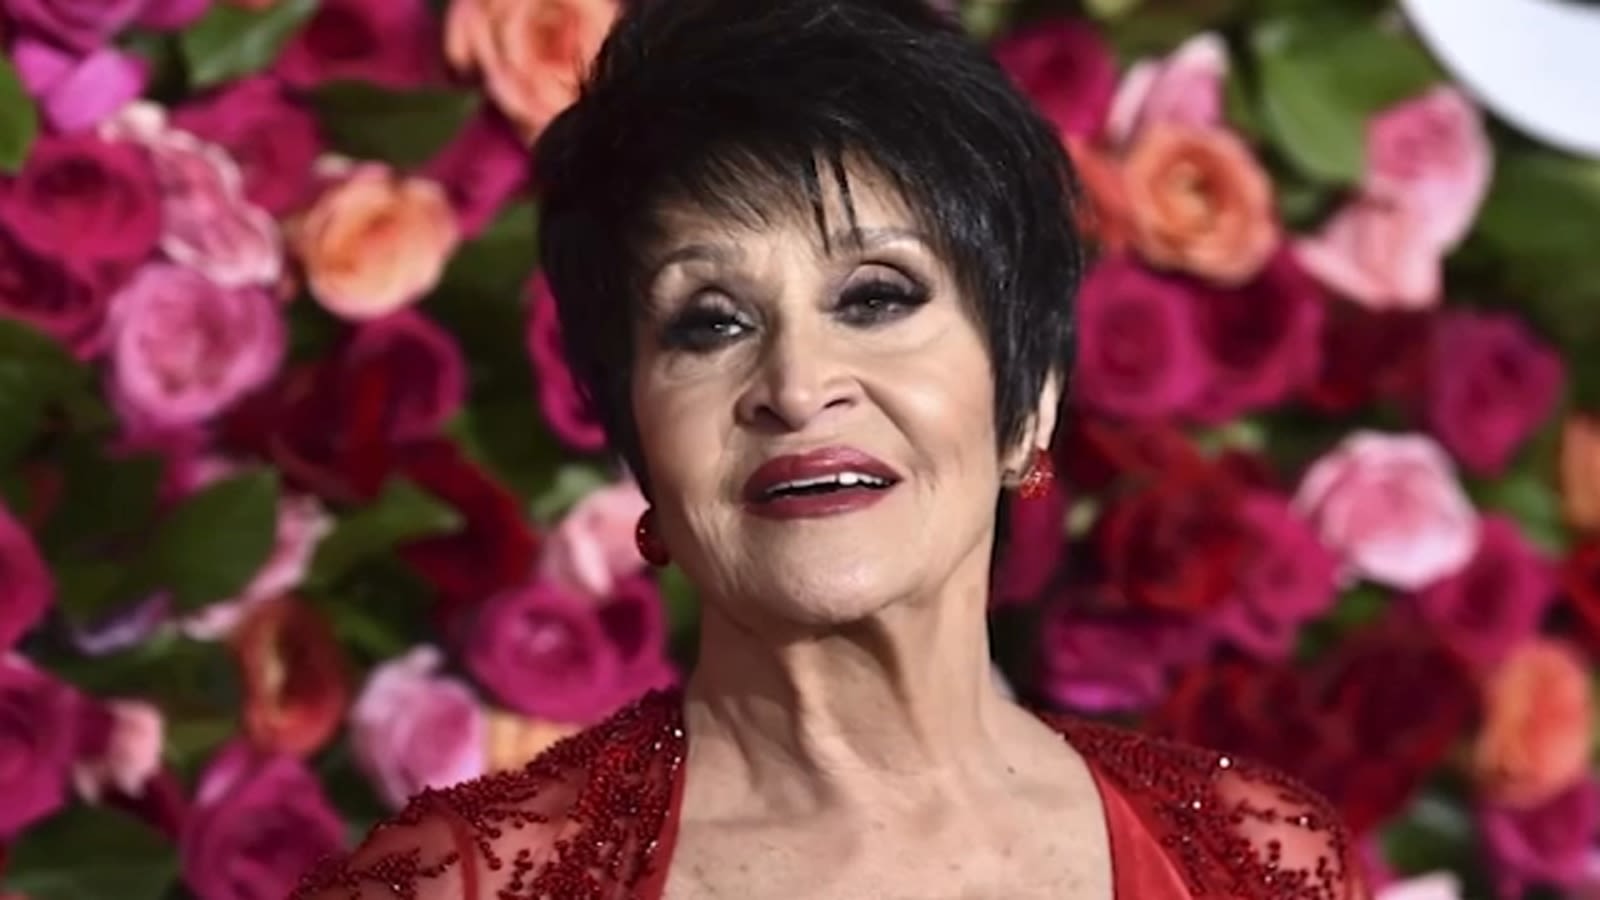 Chita Rivera Awards pays heartfelt tribute to late Broadway legend during first show since her death